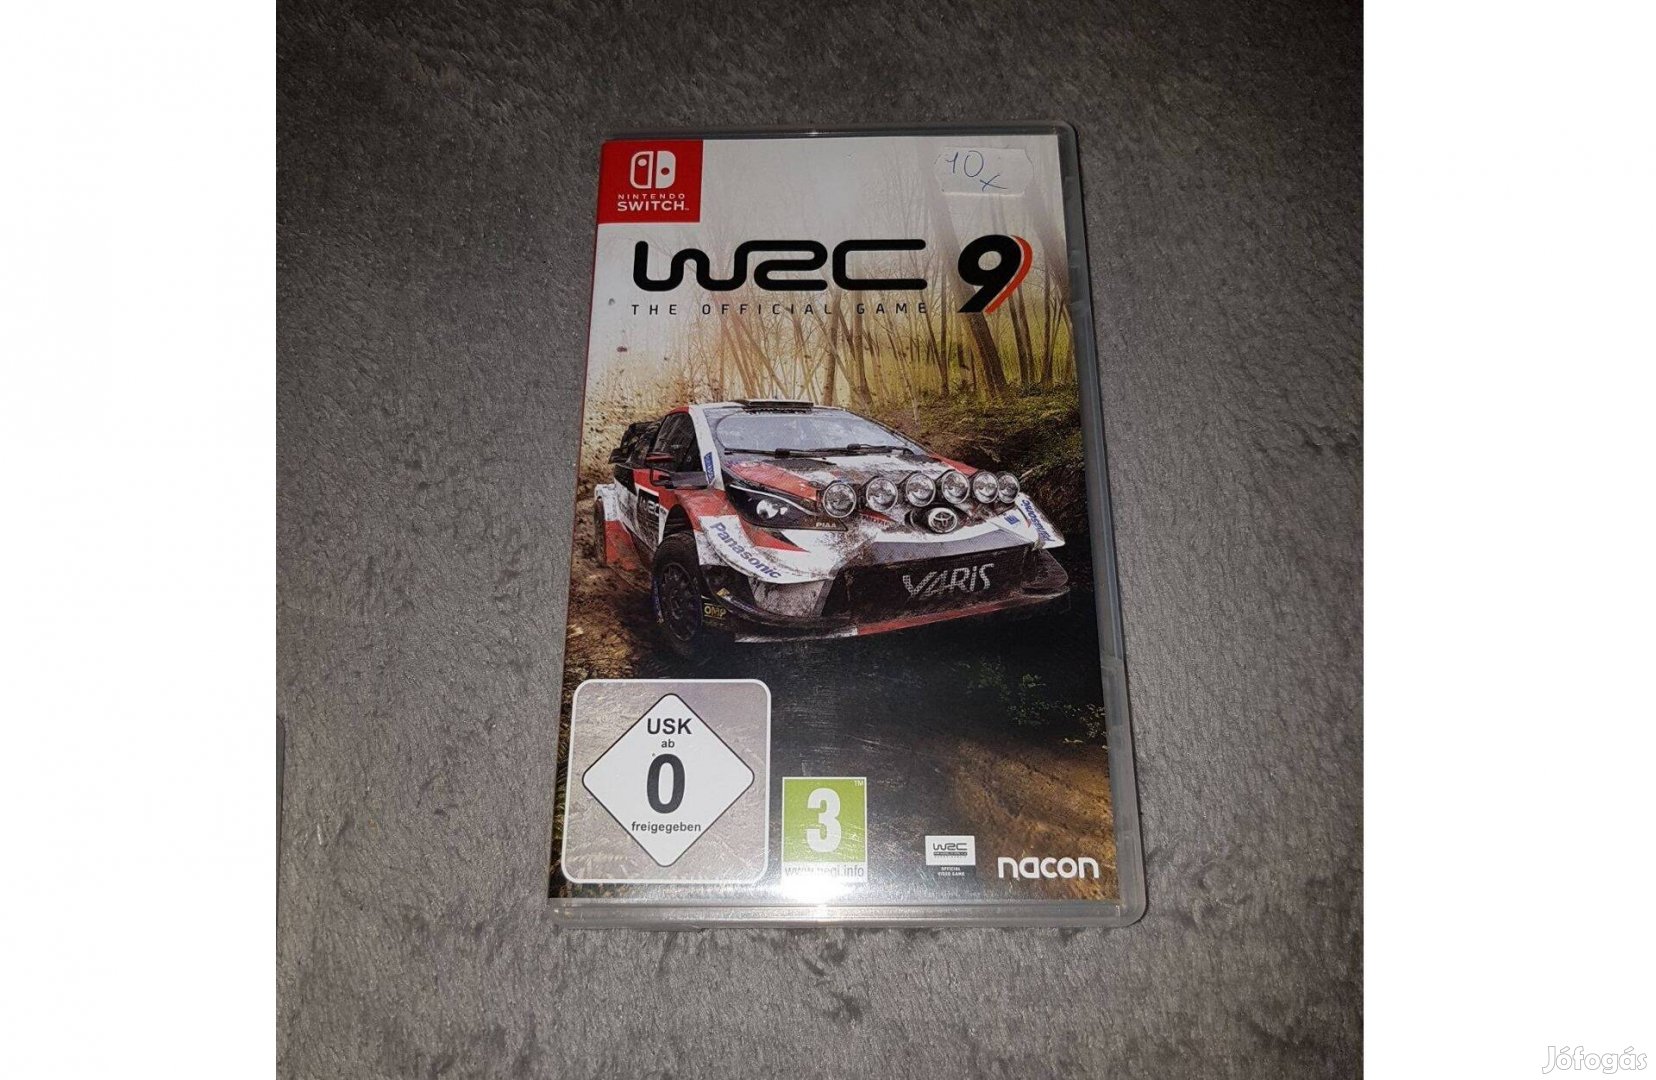 Switch wrc 9 the official game eladó